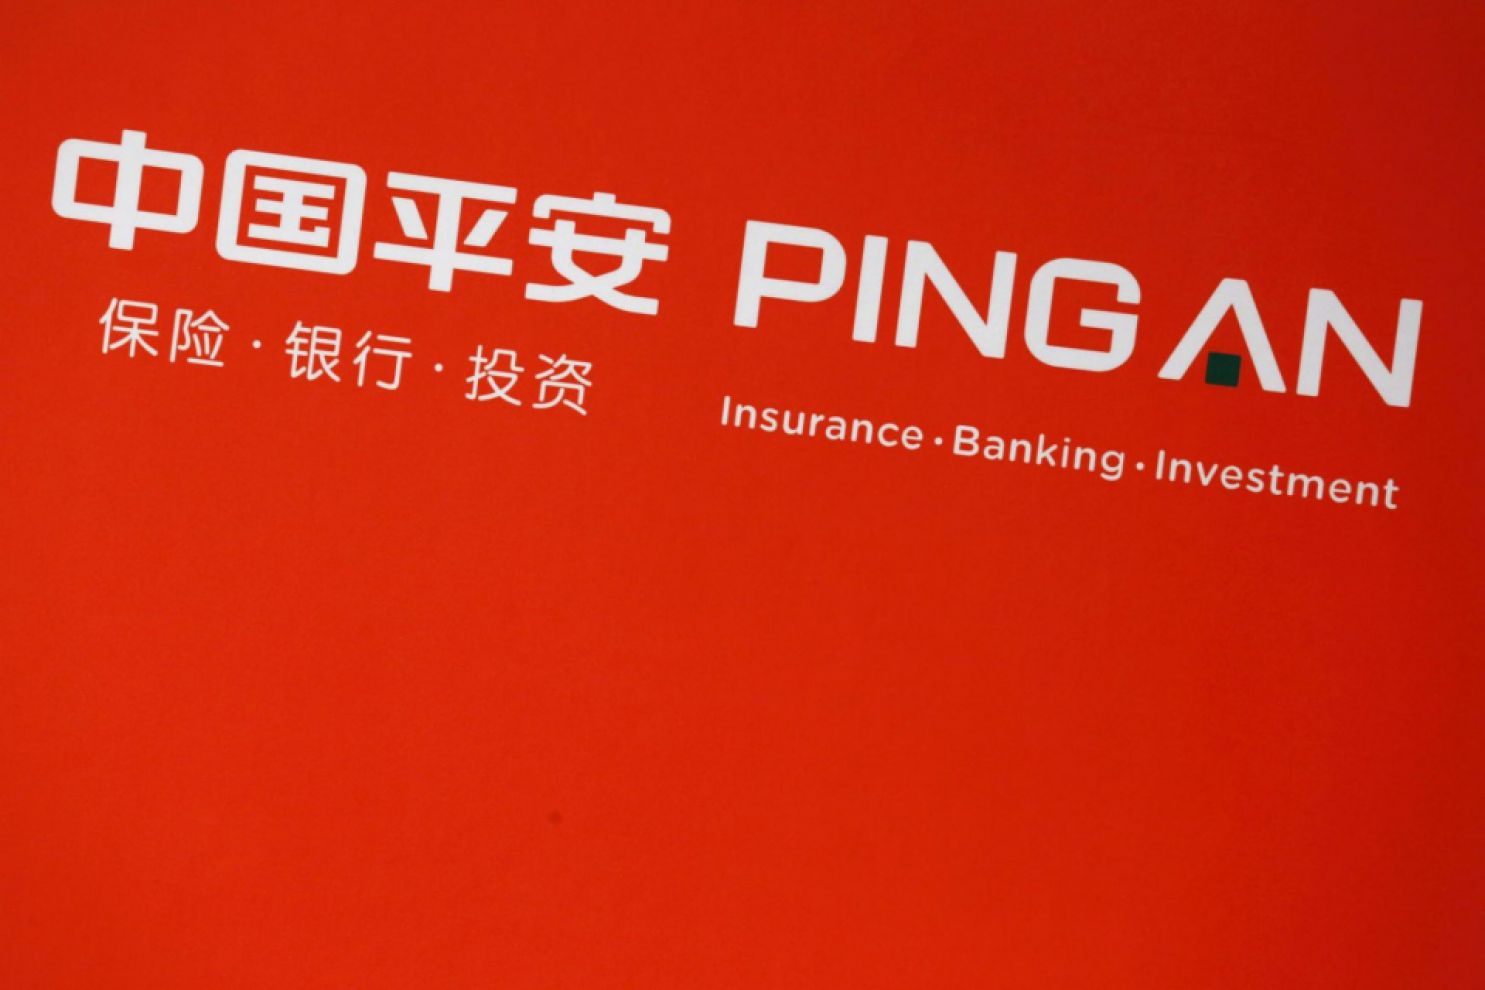 Ping An targets Japan in bid to diversify outside of China